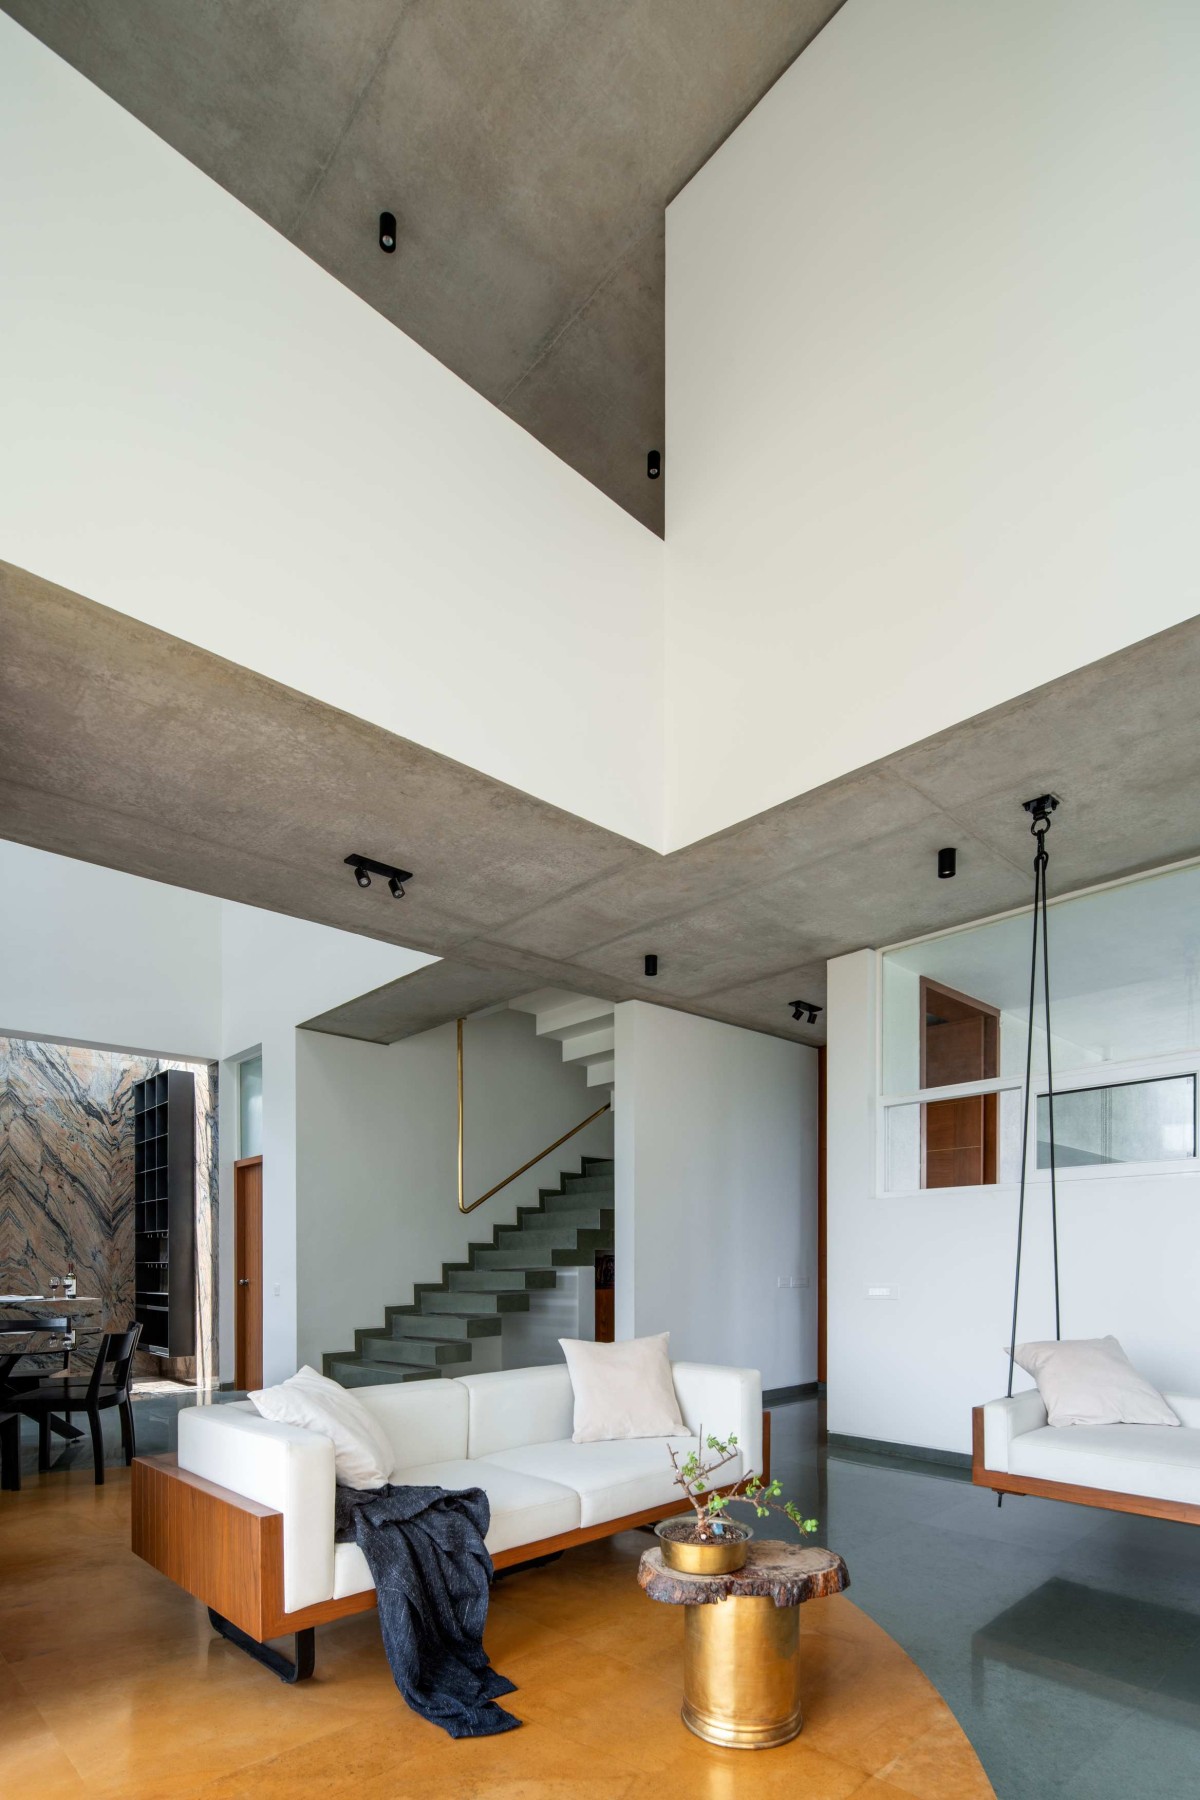 Living room of Joshi House by Anahata Architects